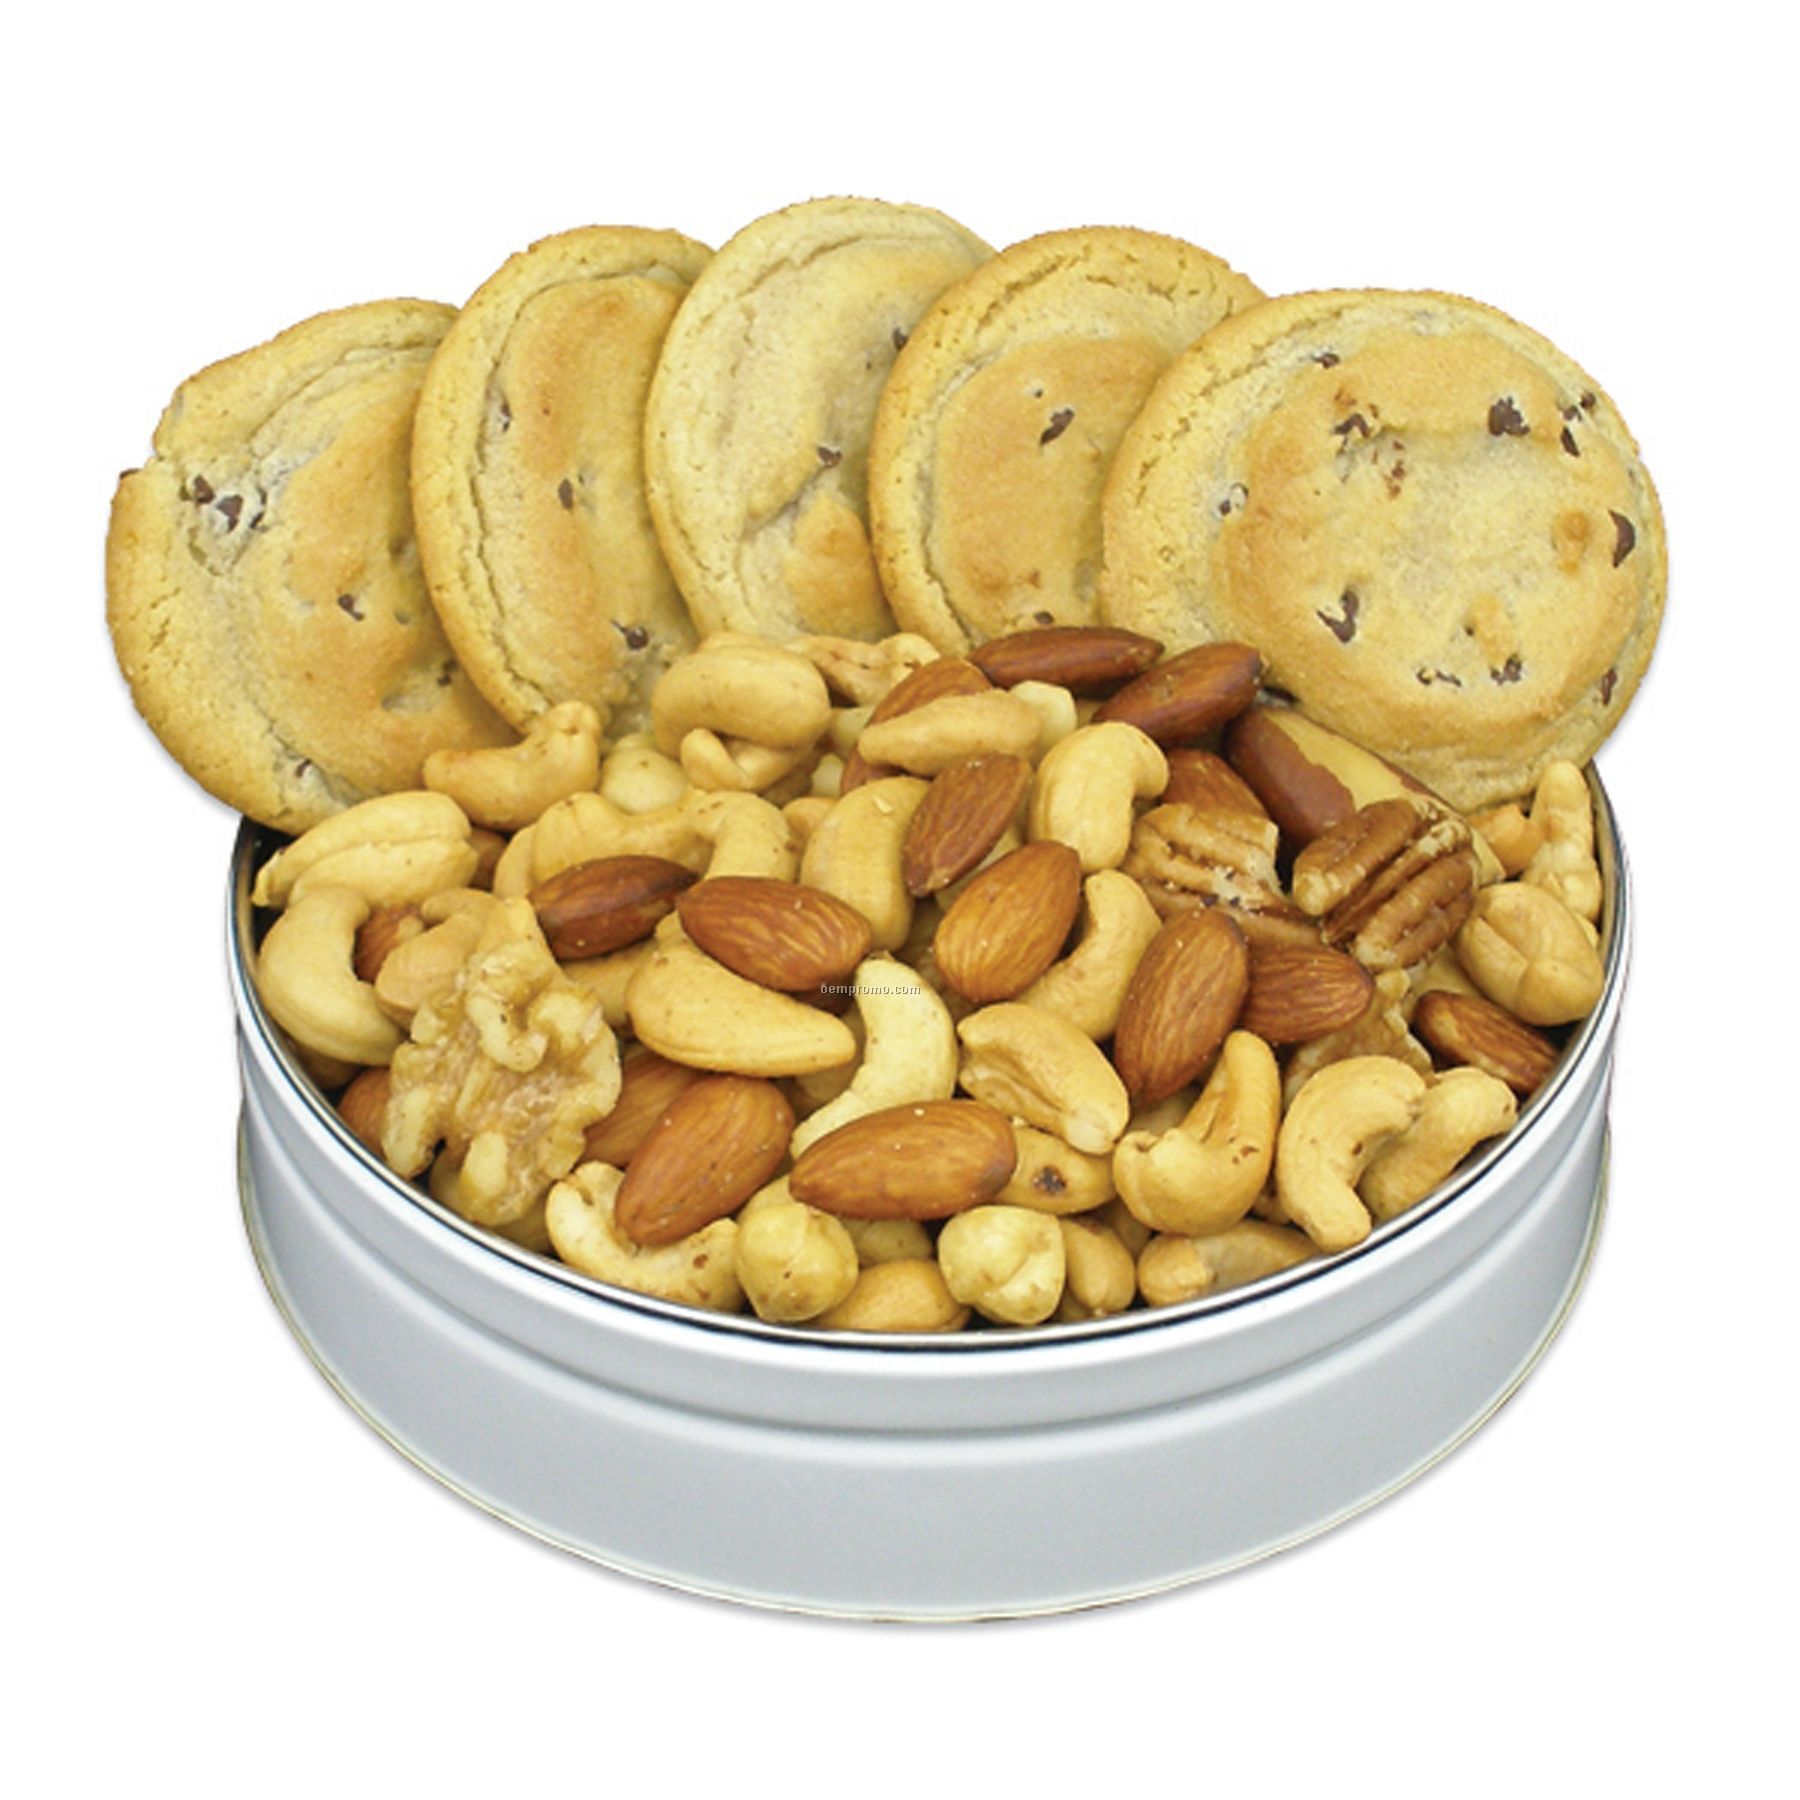 Cookie Nut Combos - 5 Chocolate Chip Cookies & Fancy Mixed Nuts (5 Oz.)